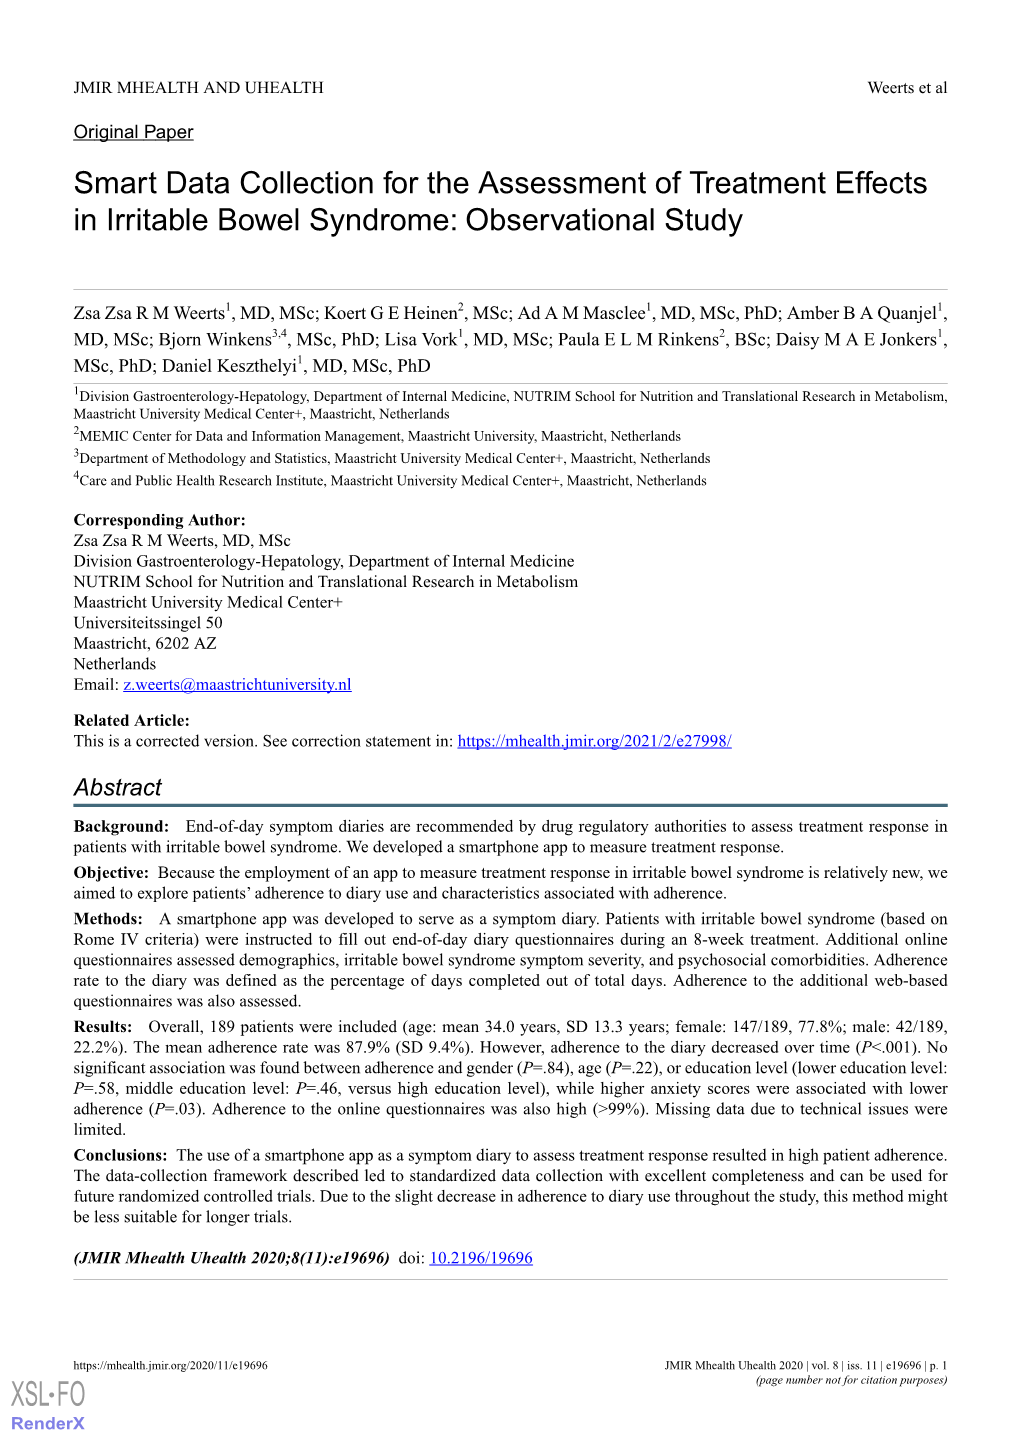 Smart Data Collection for the Assessment of Treatment Effects in Irritable Bowel Syndrome: Observational Study